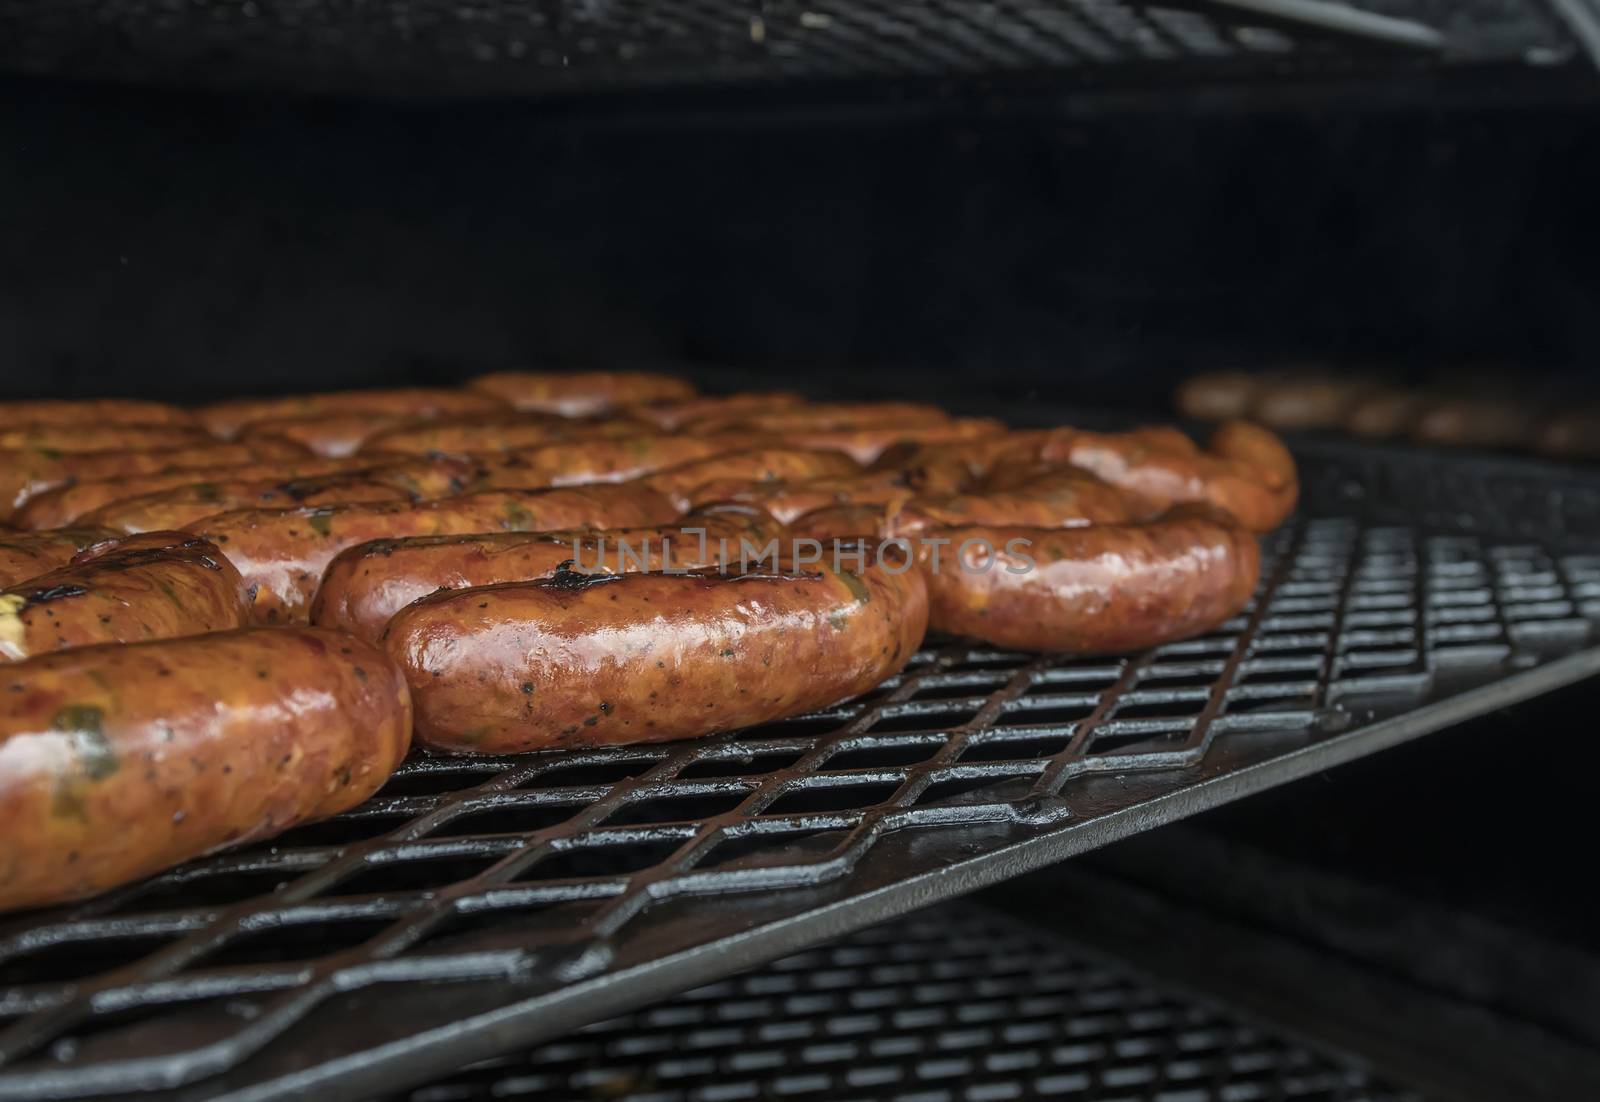 Gourmet Sausages cooking on the Grill by gregory21